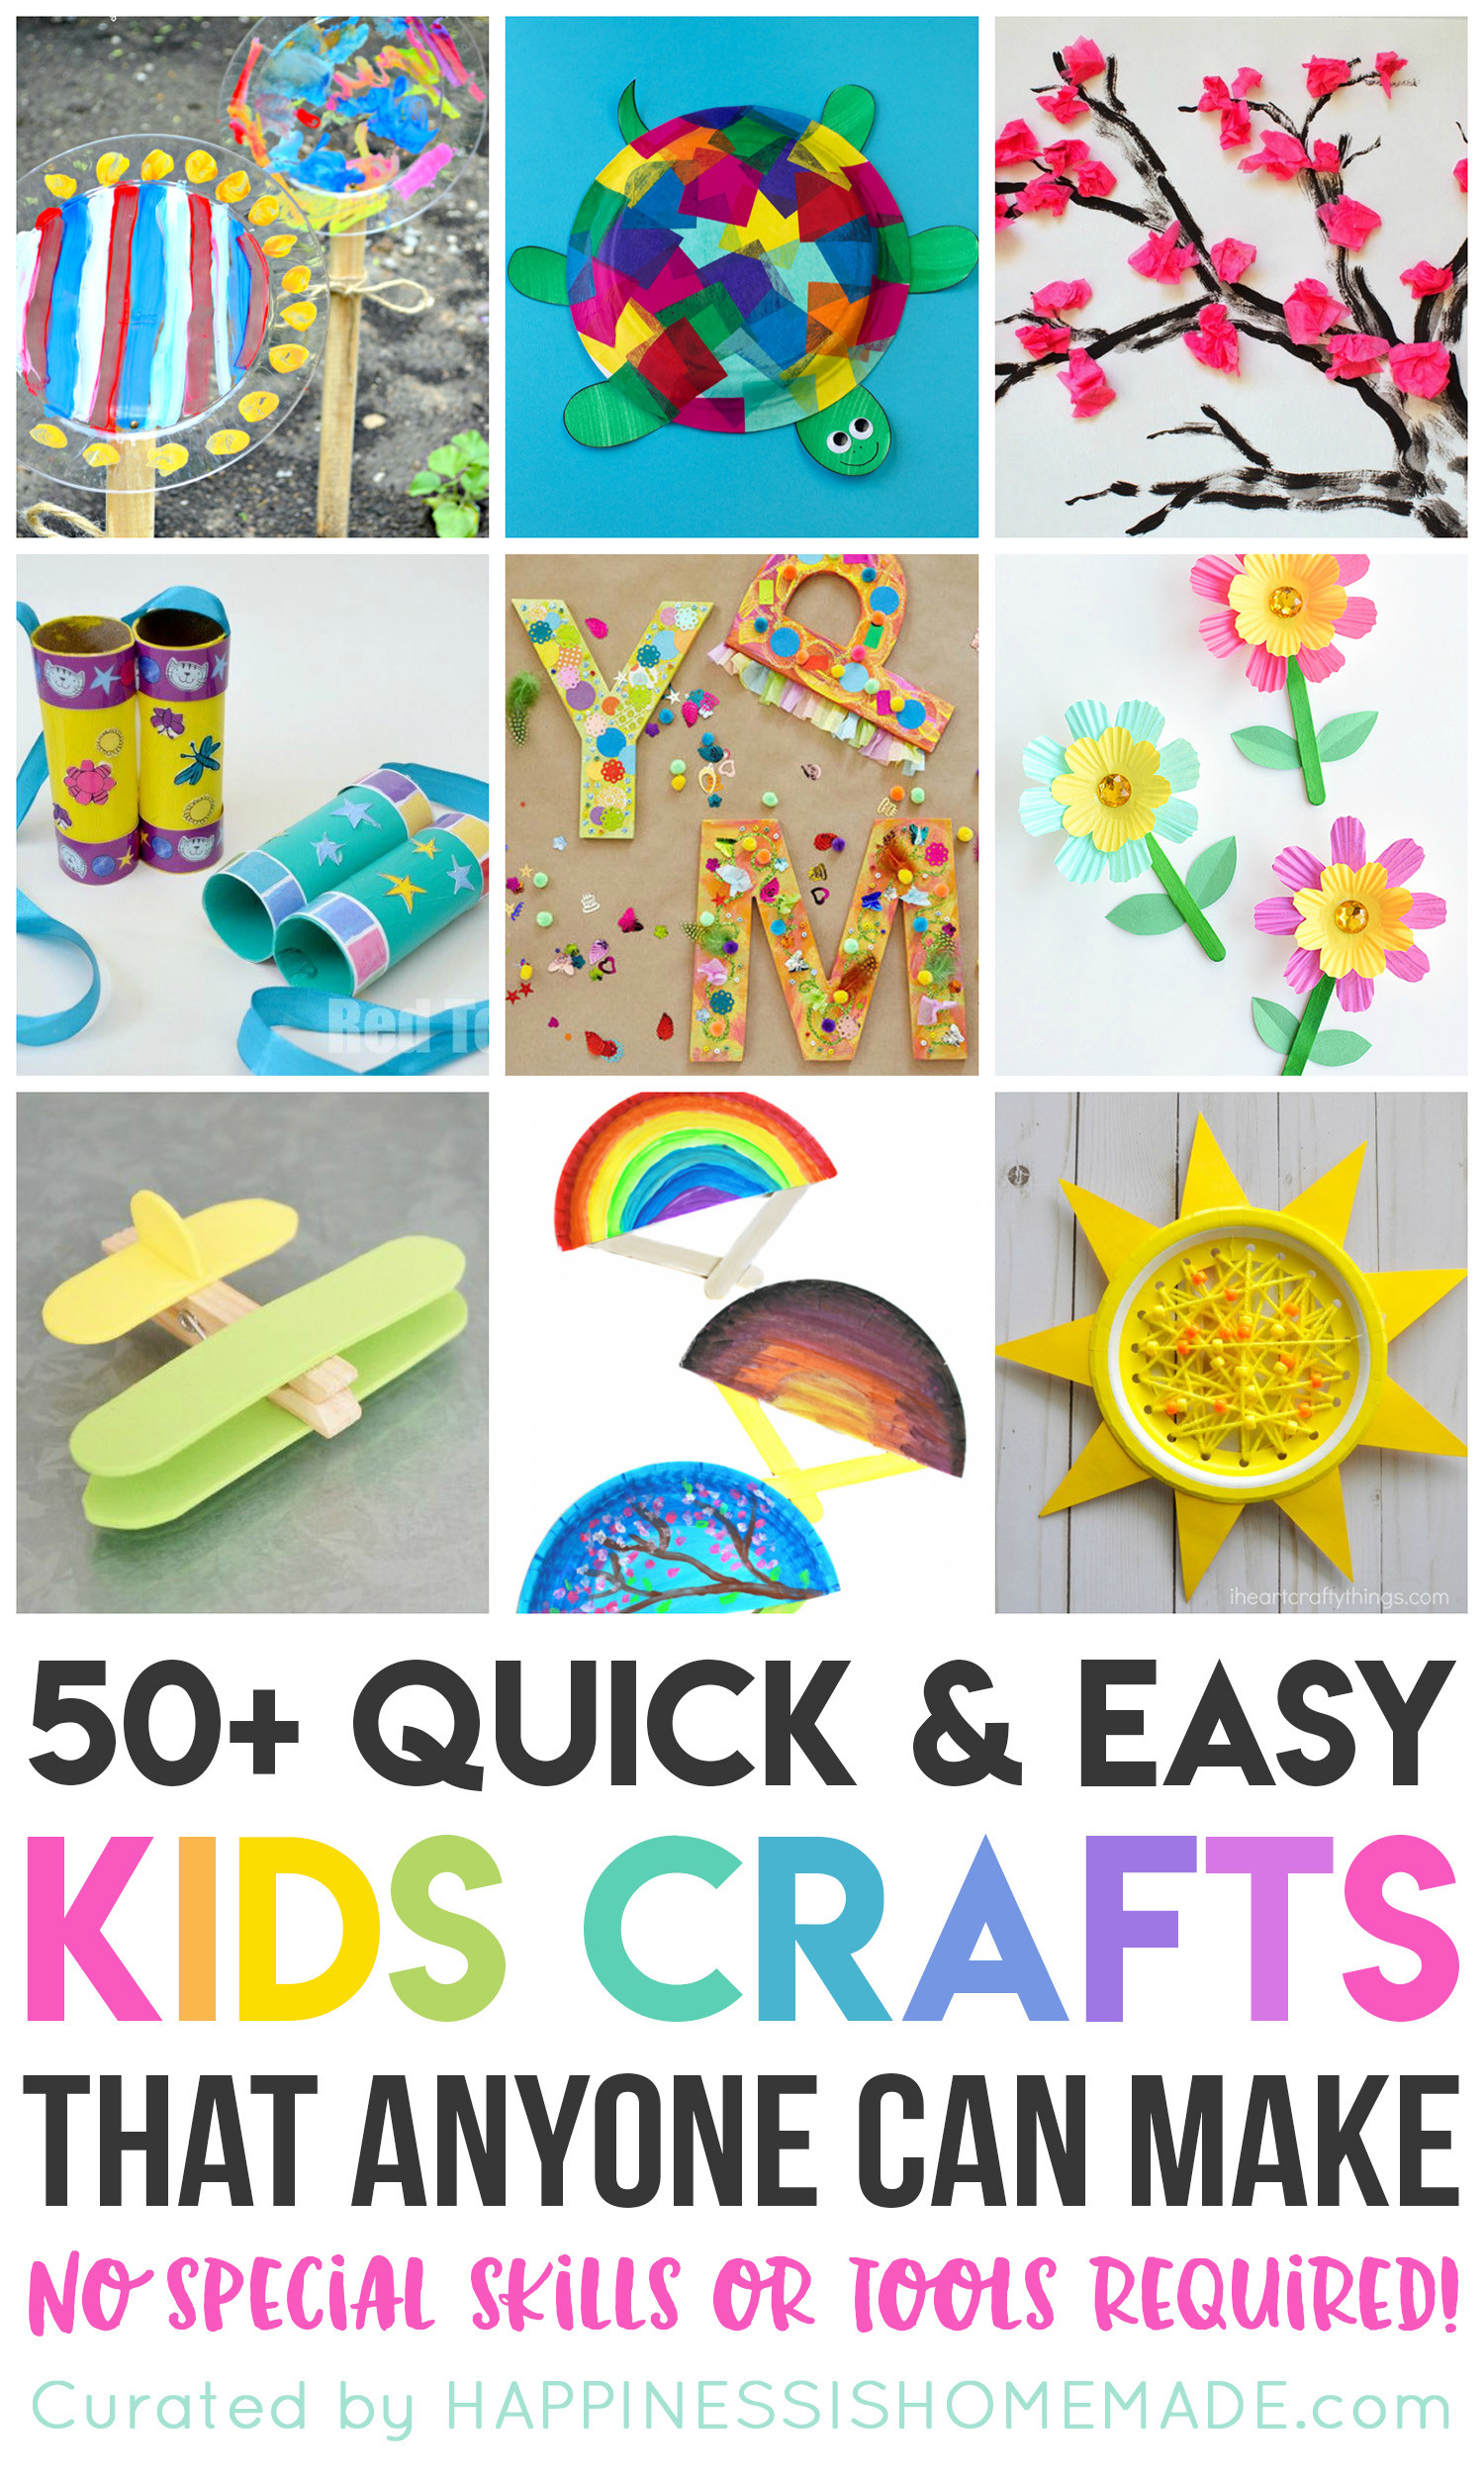 Easy Activities For Kids
 50 Quick & Easy Kids Crafts that ANYONE Can Make